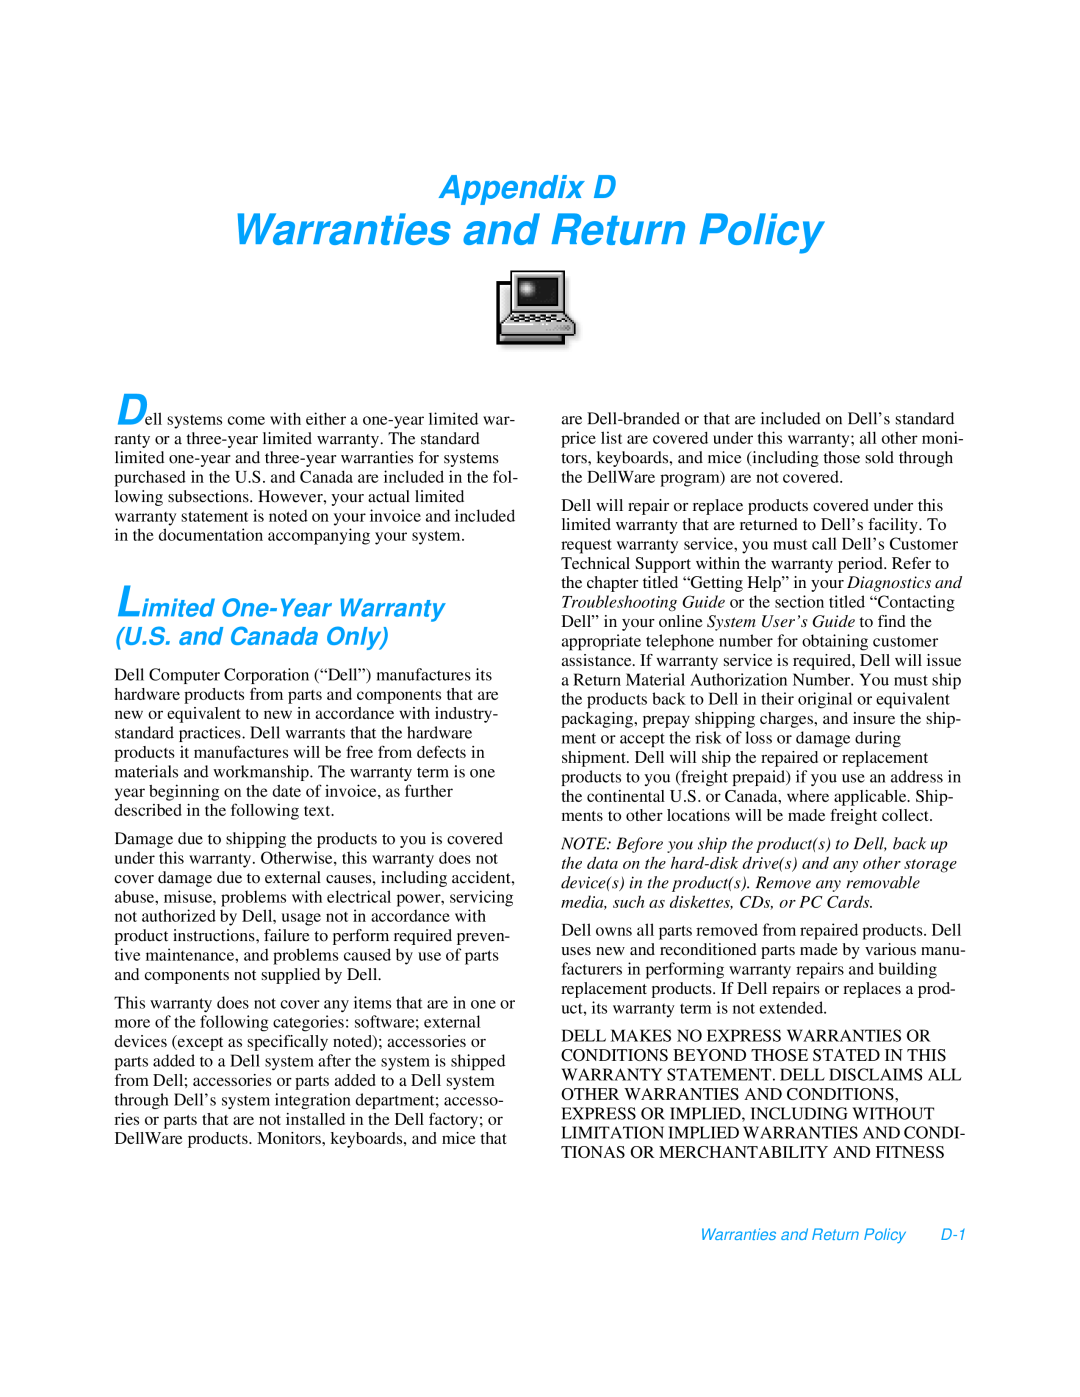 Dell 3000 manual Warranties and Return Policy, Appendix D, Limited One-Year Warranty U.S. and Canada Only 